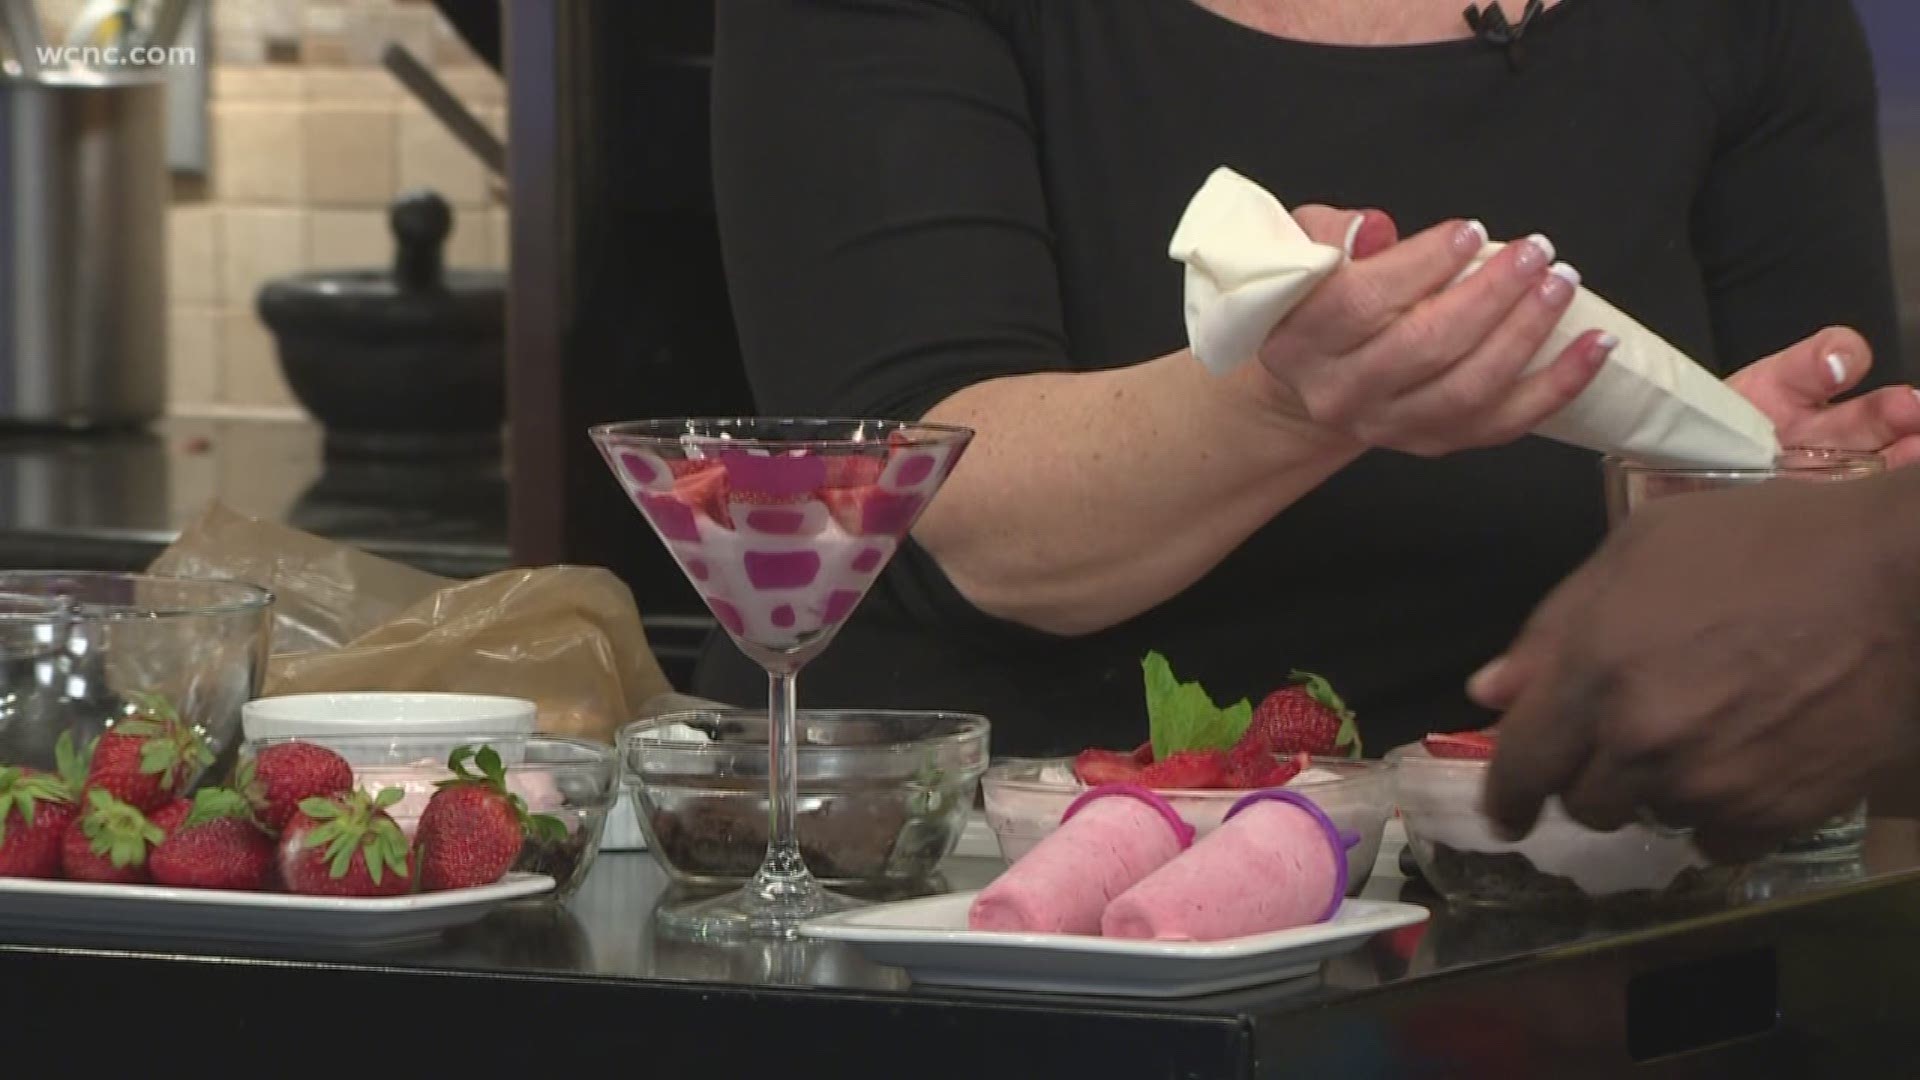 Strawberries are in season and what better way to use them than a simple, summer dessert.